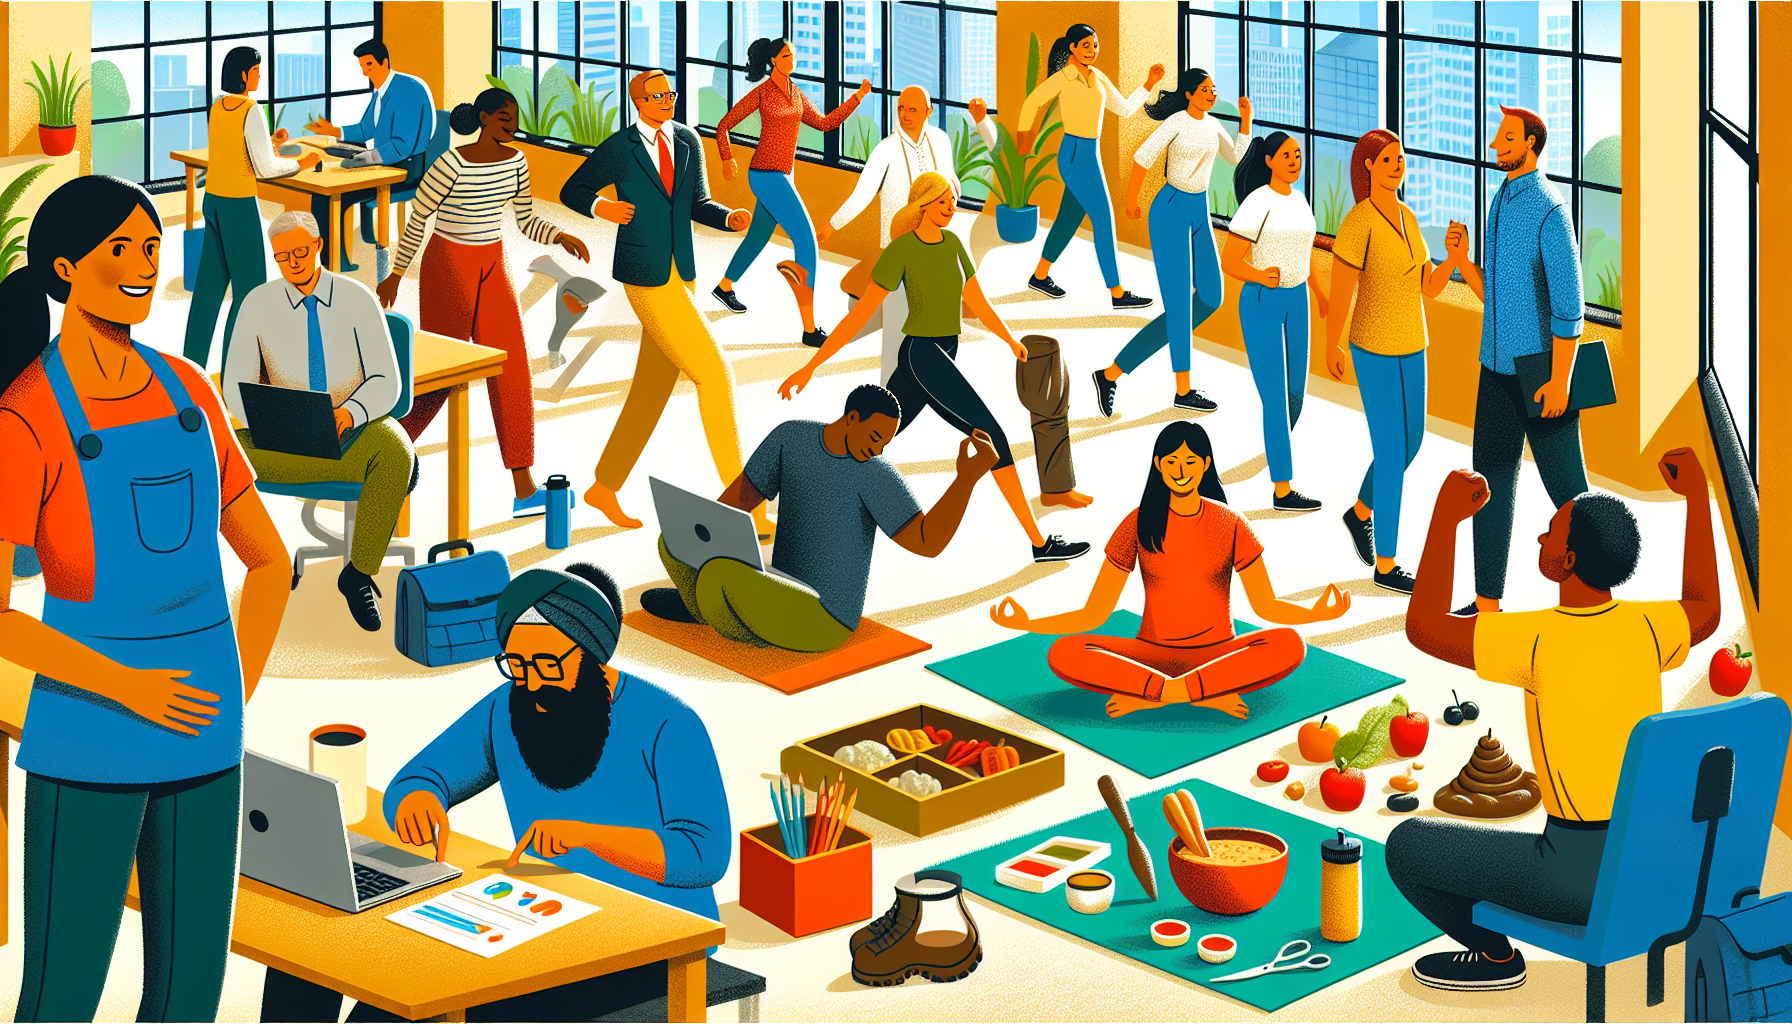 Illustration of employees participating in wellness challenges